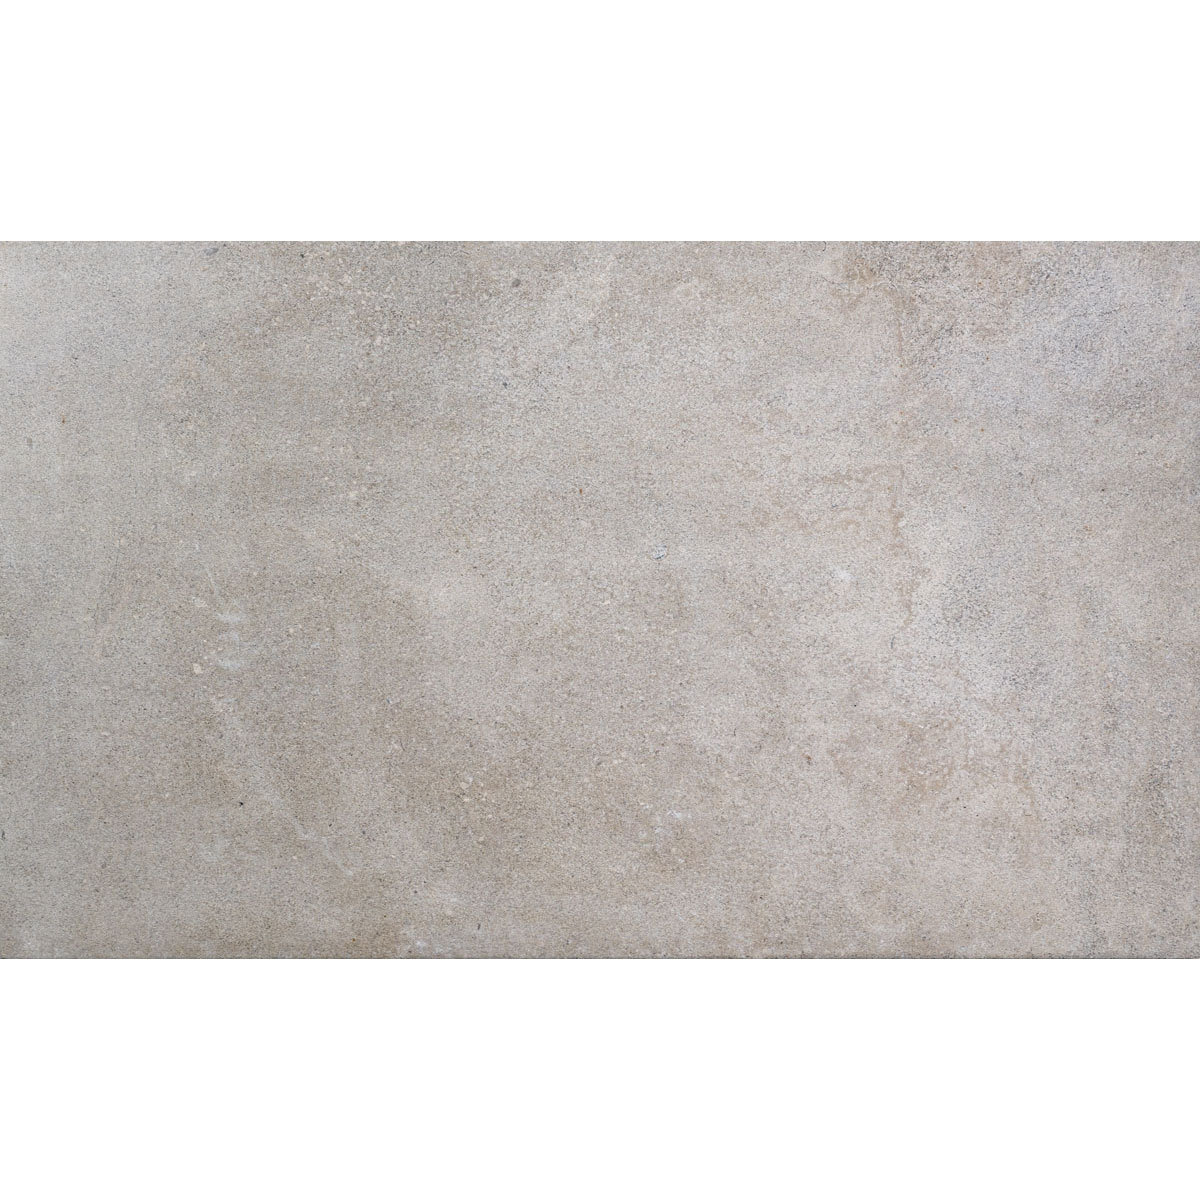 Ochre Natural Large Rectangle, product variant image